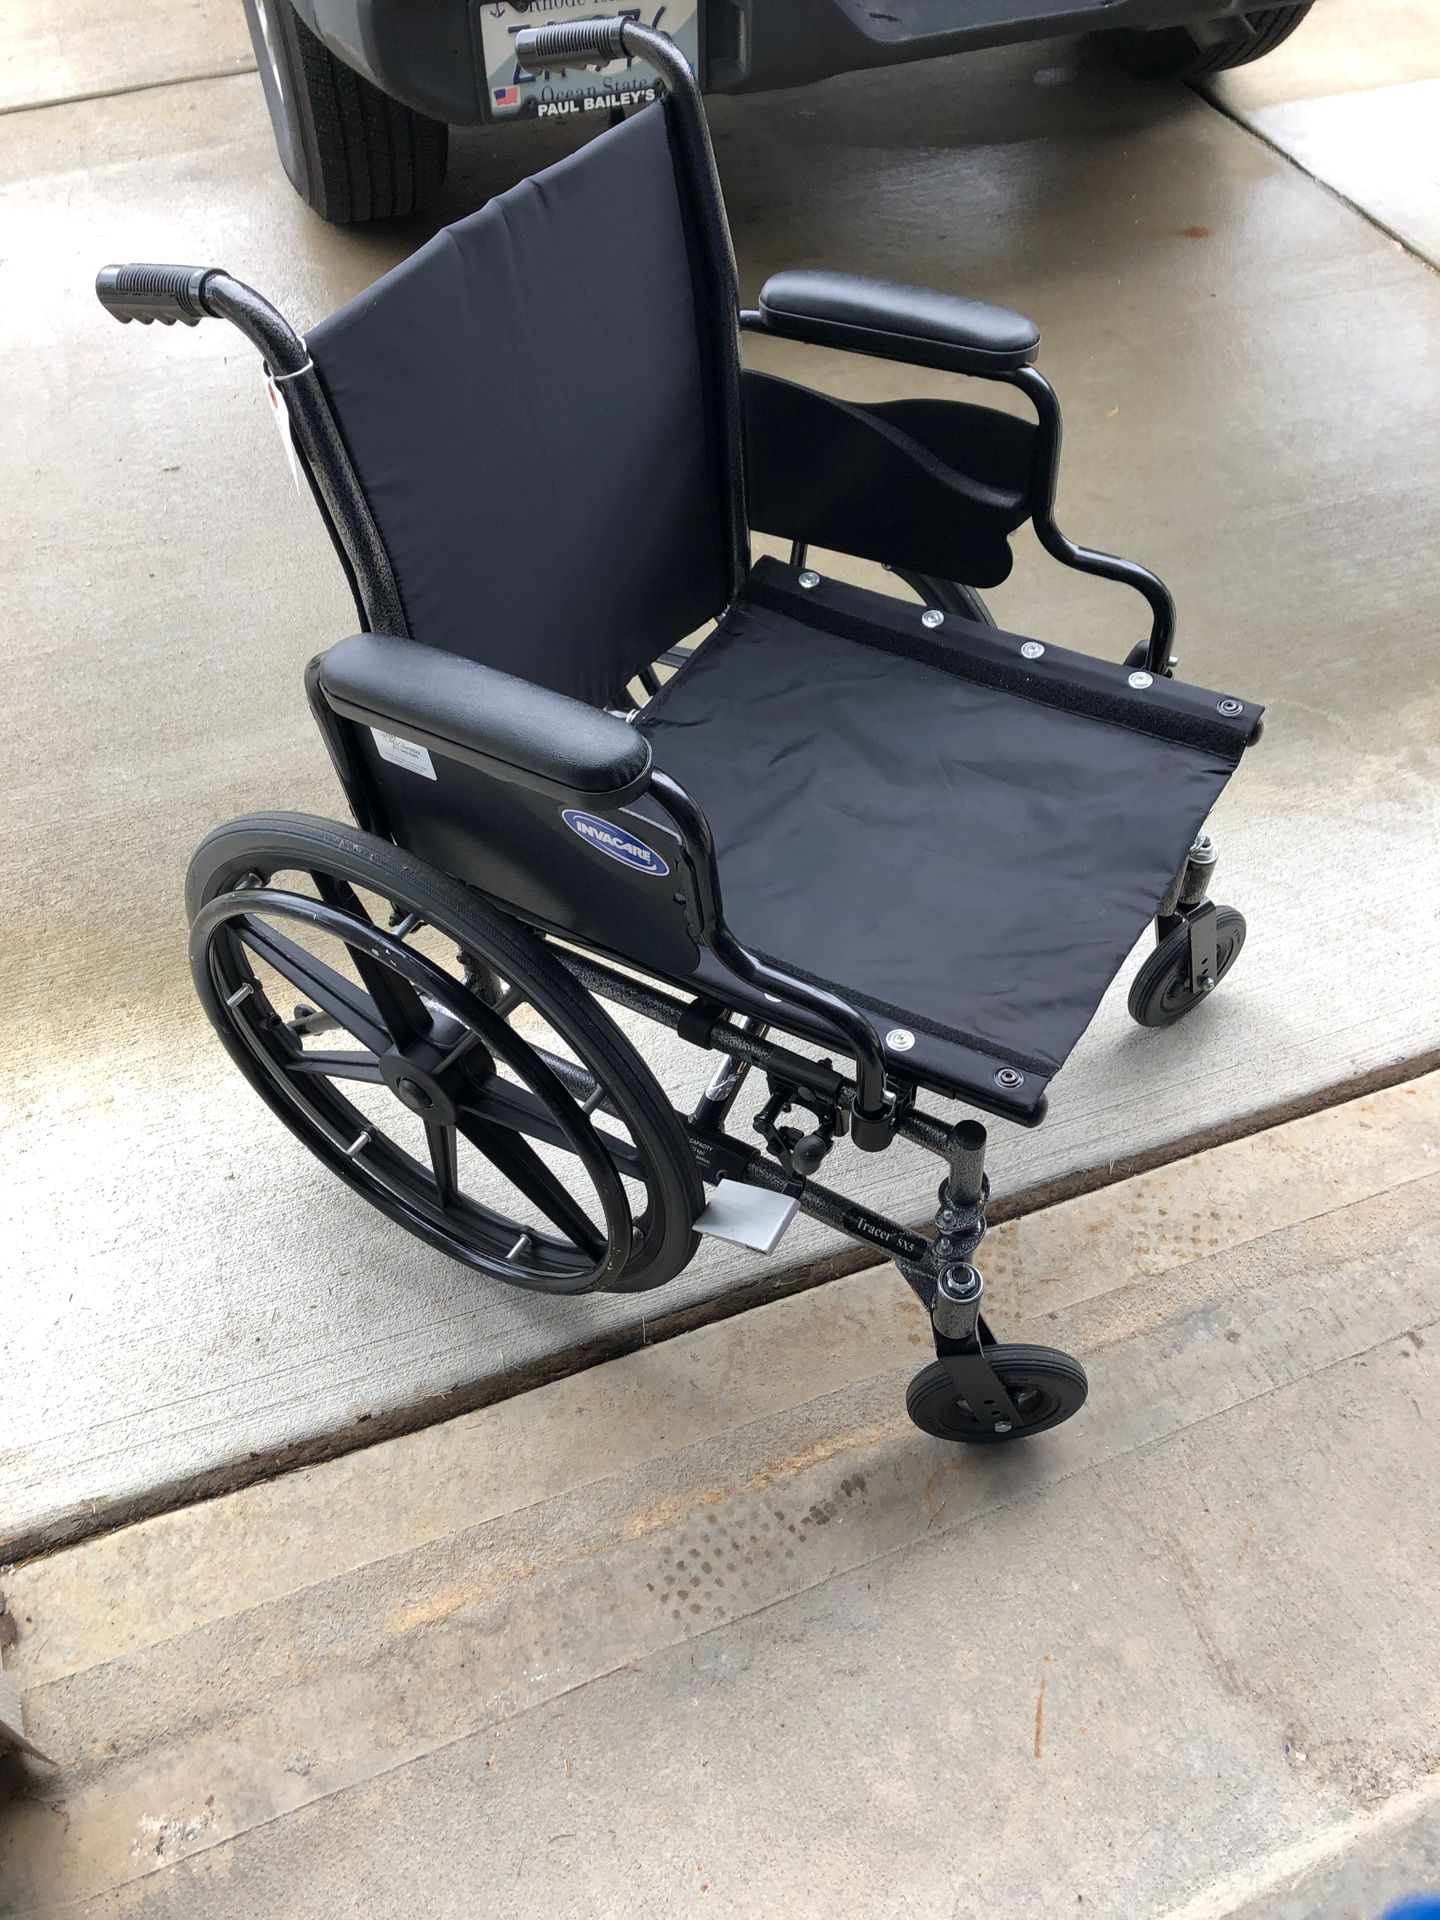 Invacare wheelchair with extra pad and leg supports